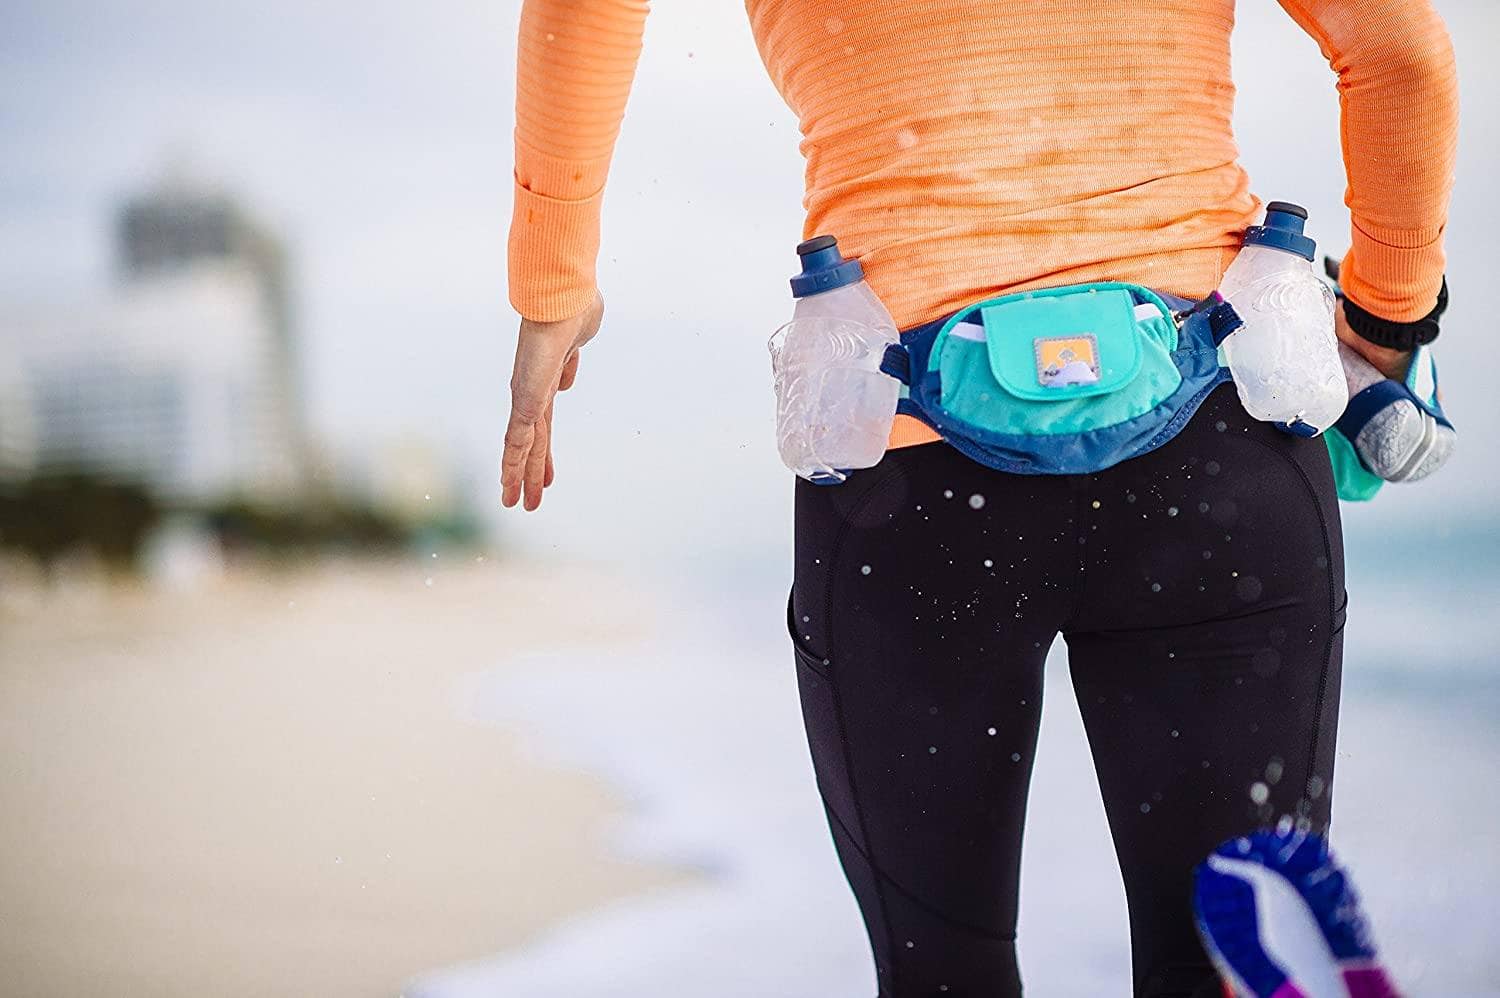 10 Best Running Hydration Belts in 2022 - Reviews  Top Picks | House Grail